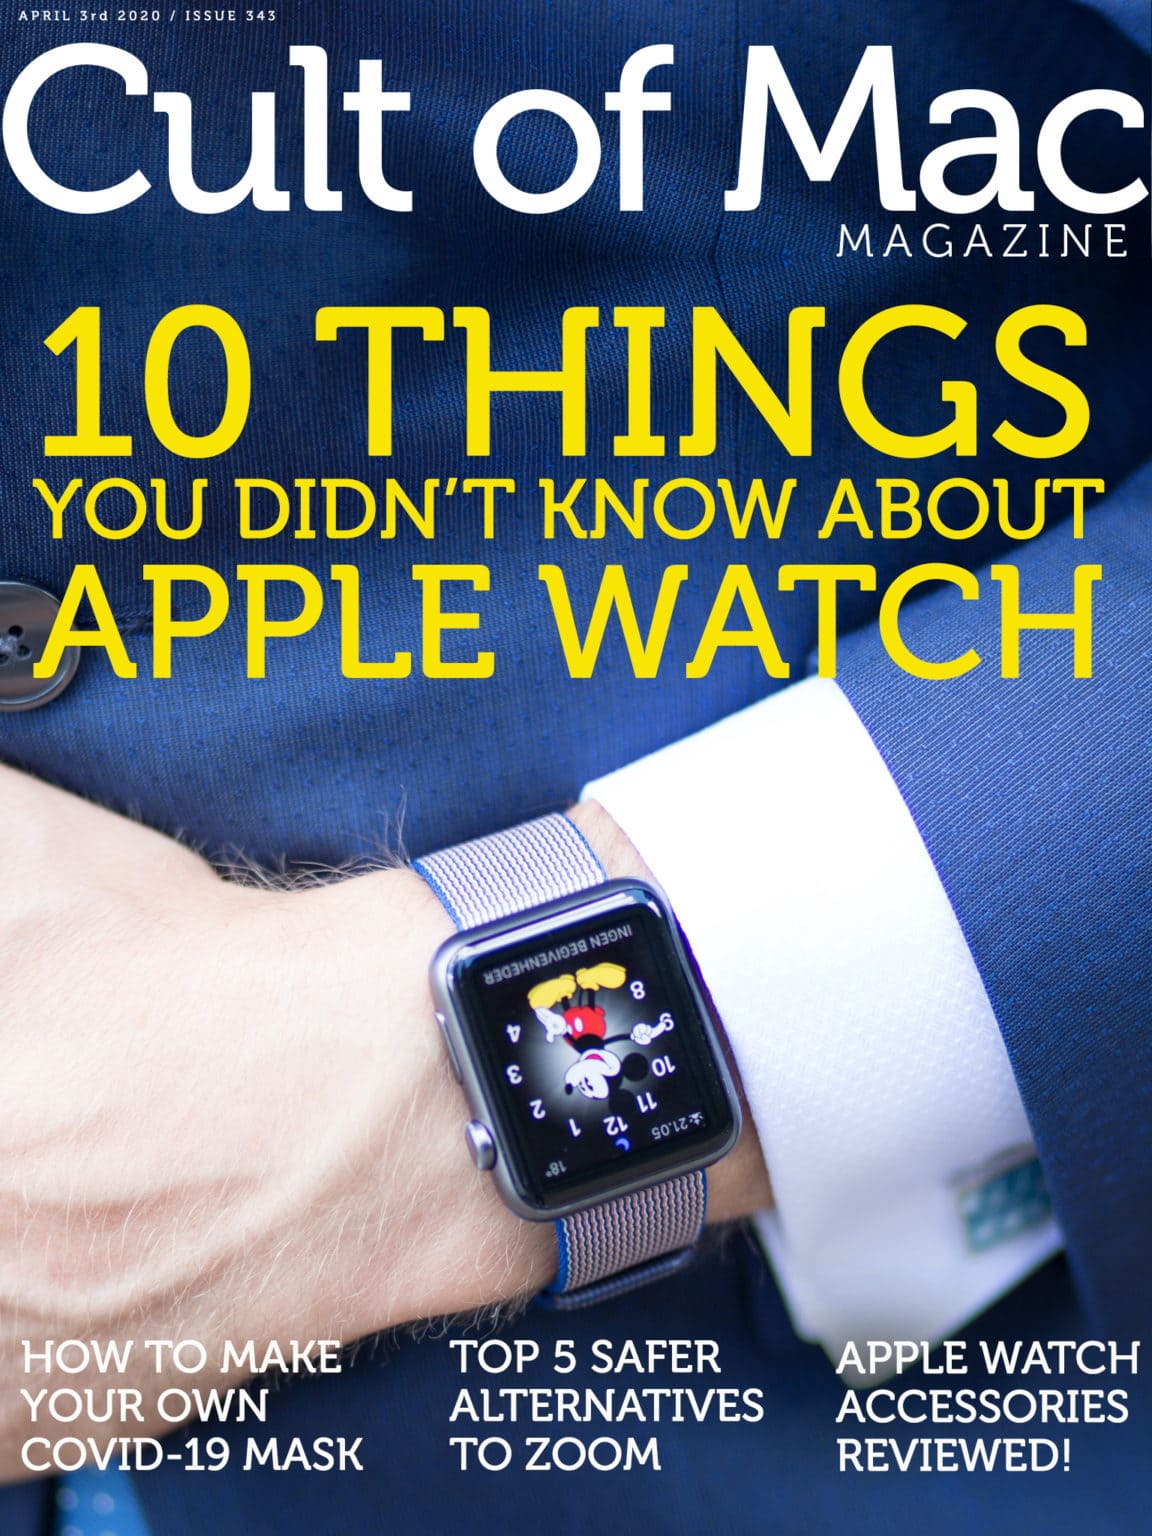 Apple Watch trivia: So you think you know Apple Watch, do you?